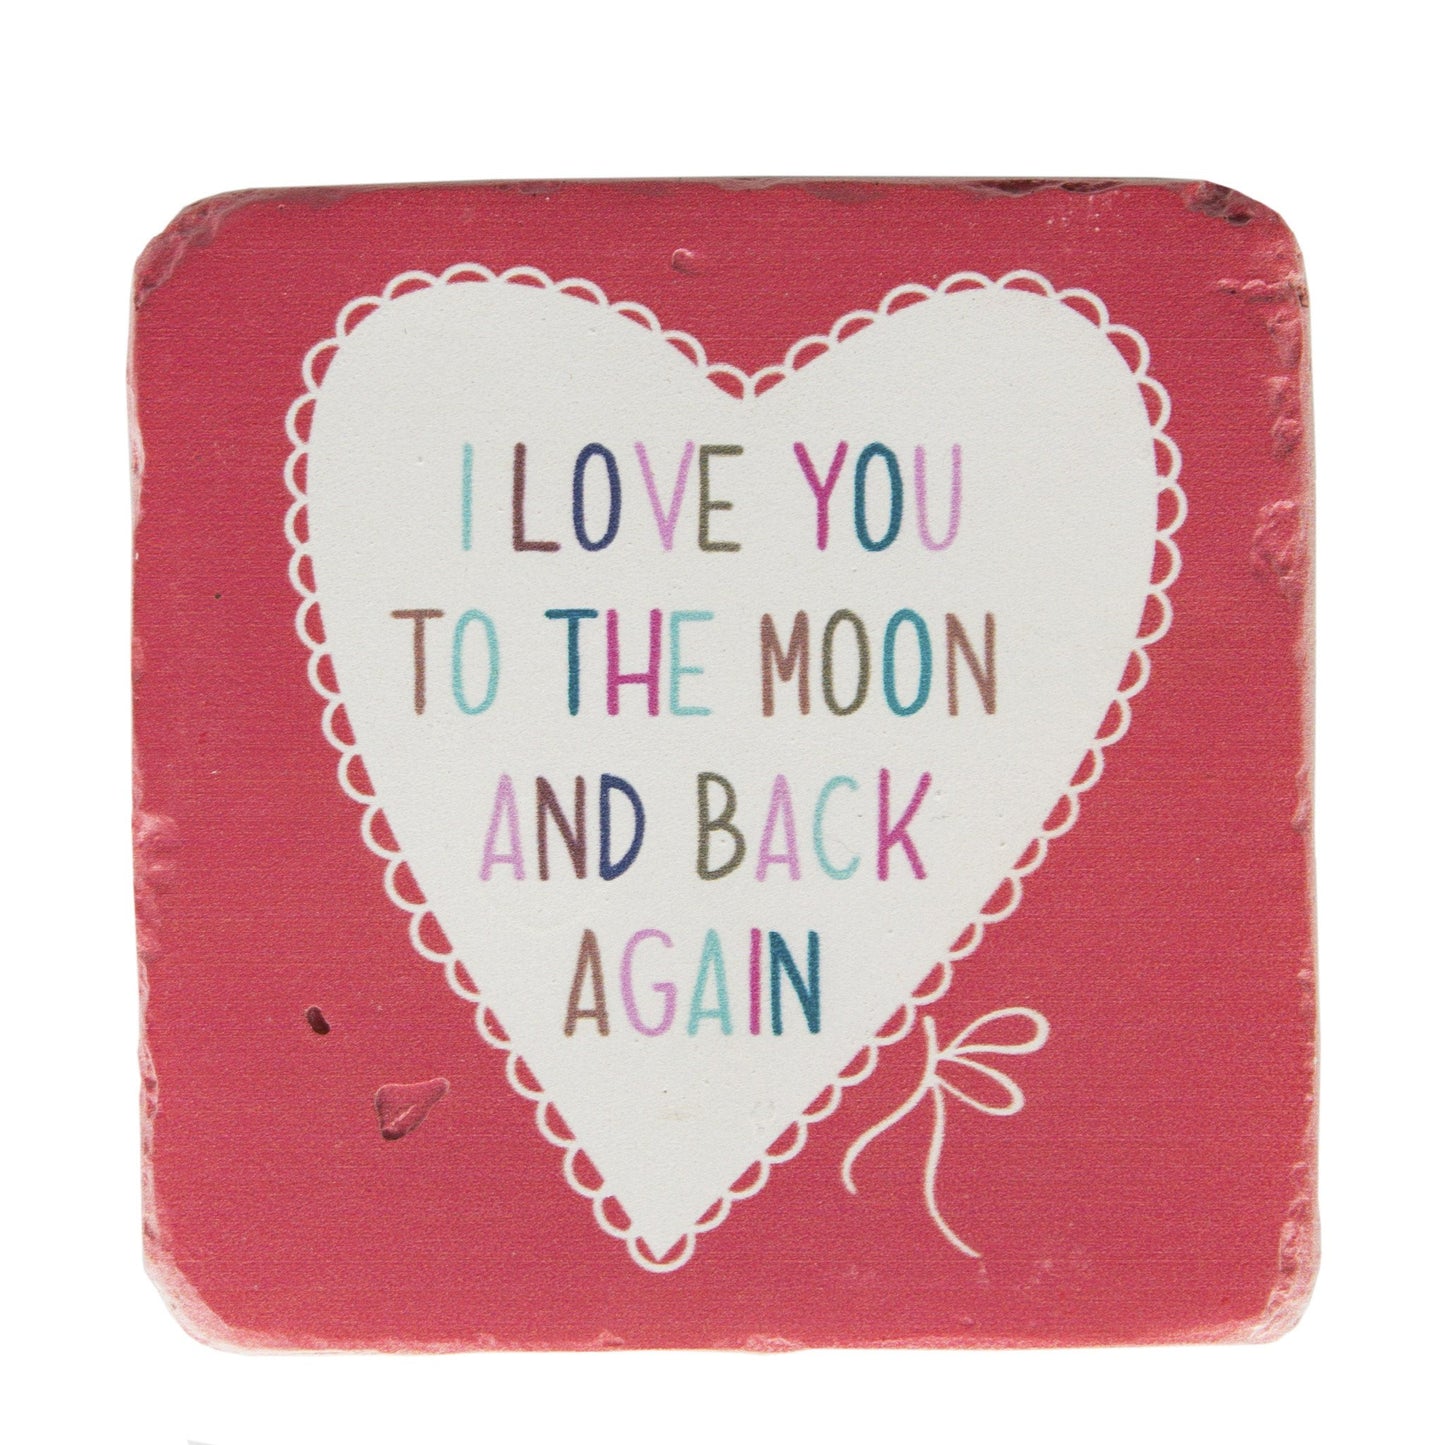 I Love You To The Moon And Back Again Lovely Sayings Coaster